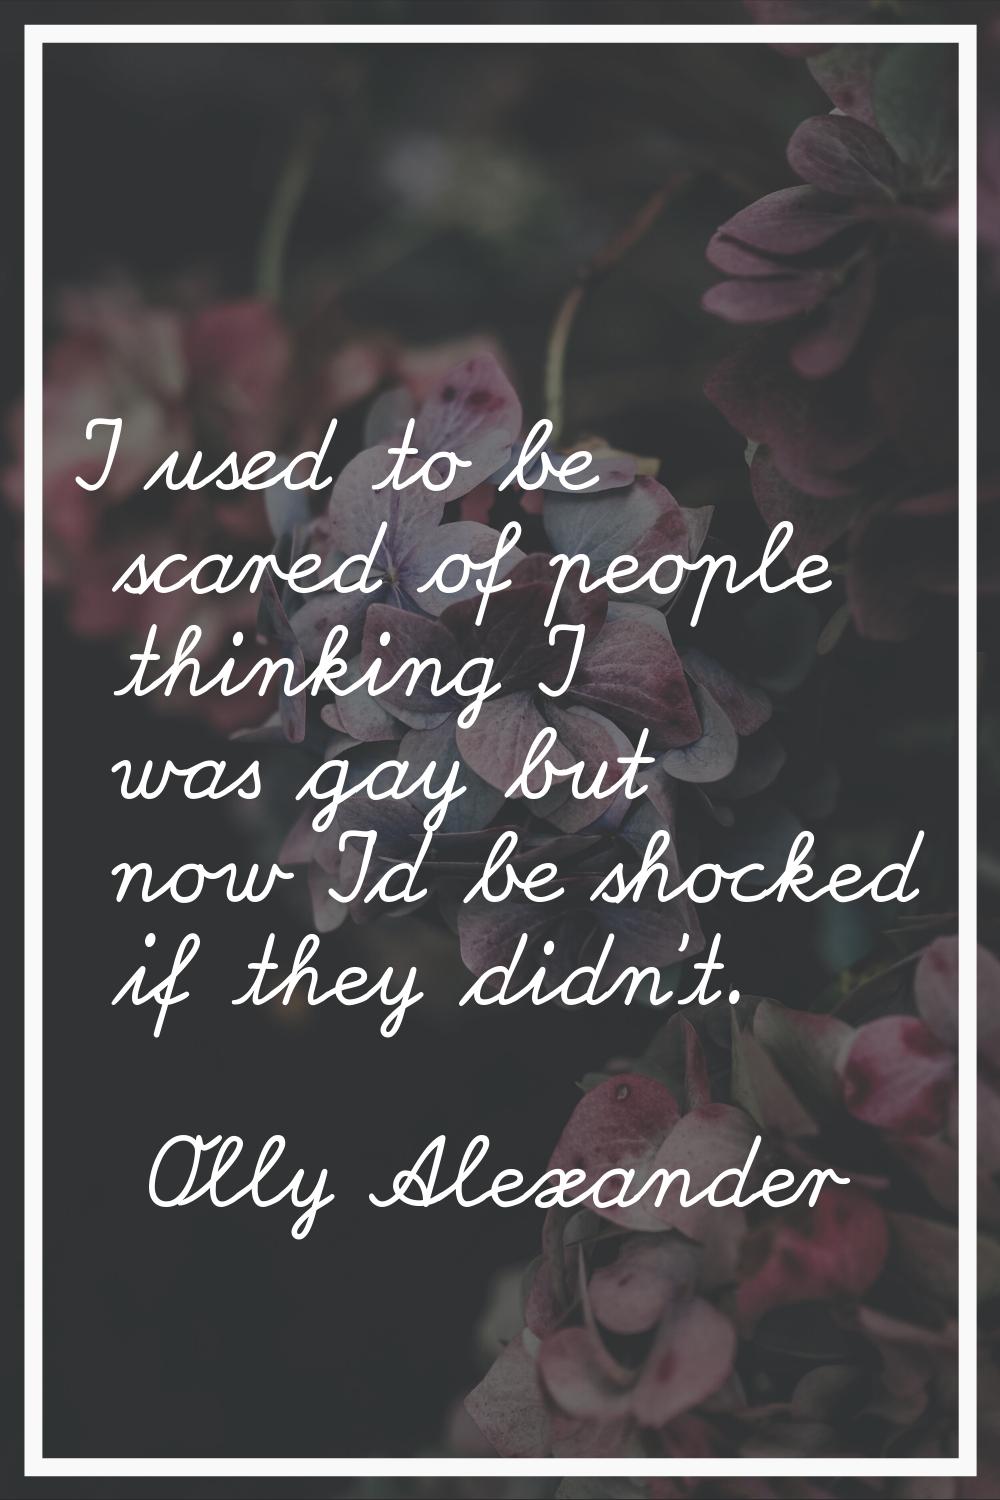 I used to be scared of people thinking I was gay but now I'd be shocked if they didn't.